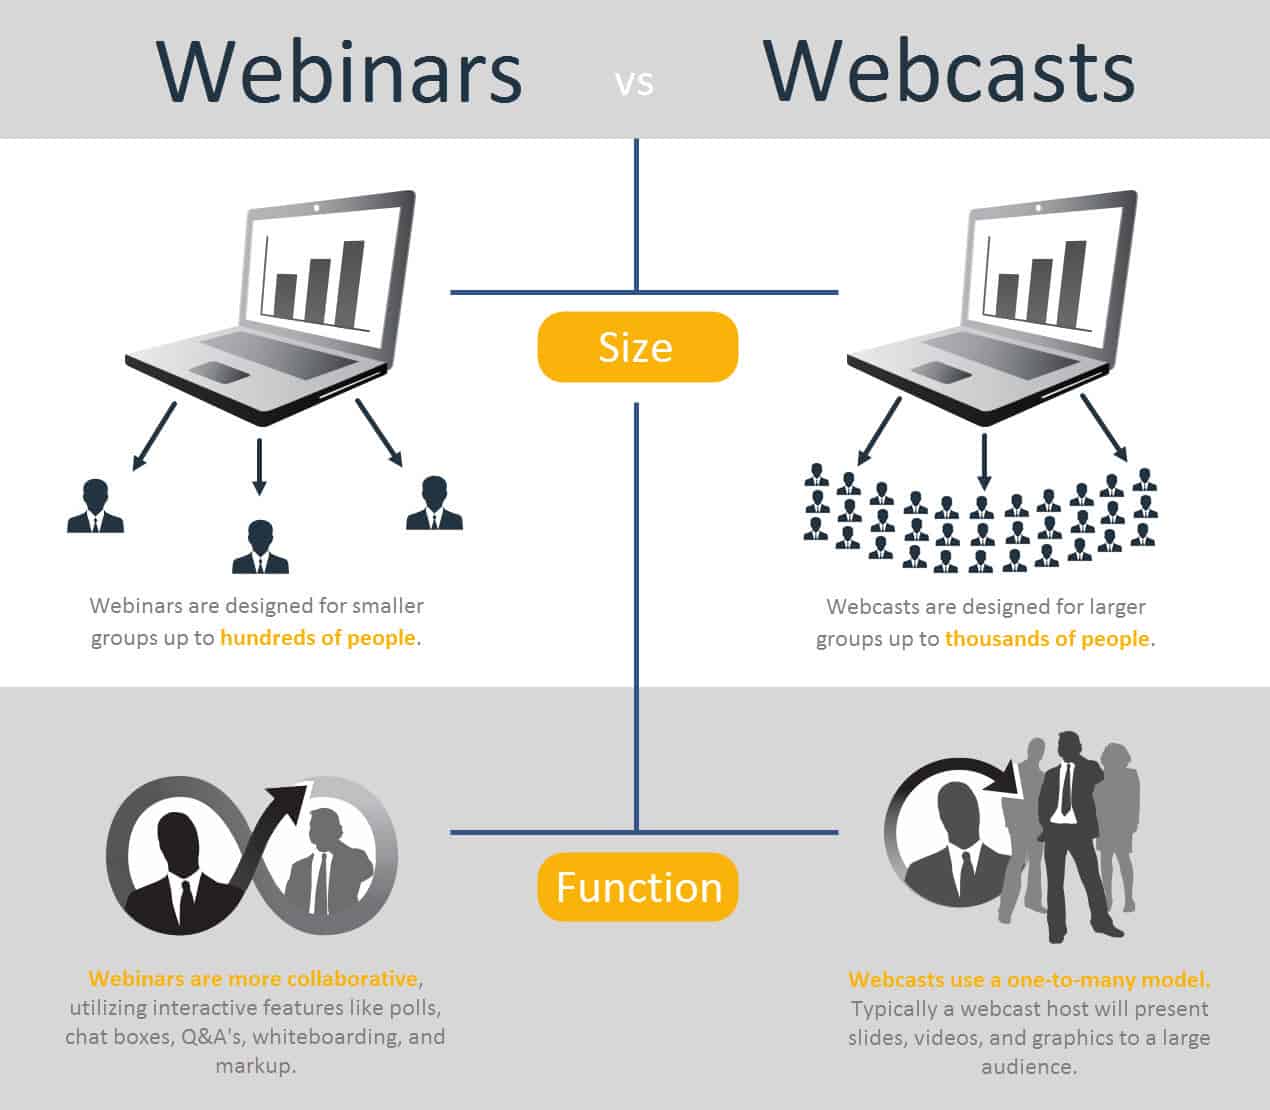 Webcast vs. Webinar: What's the Difference?